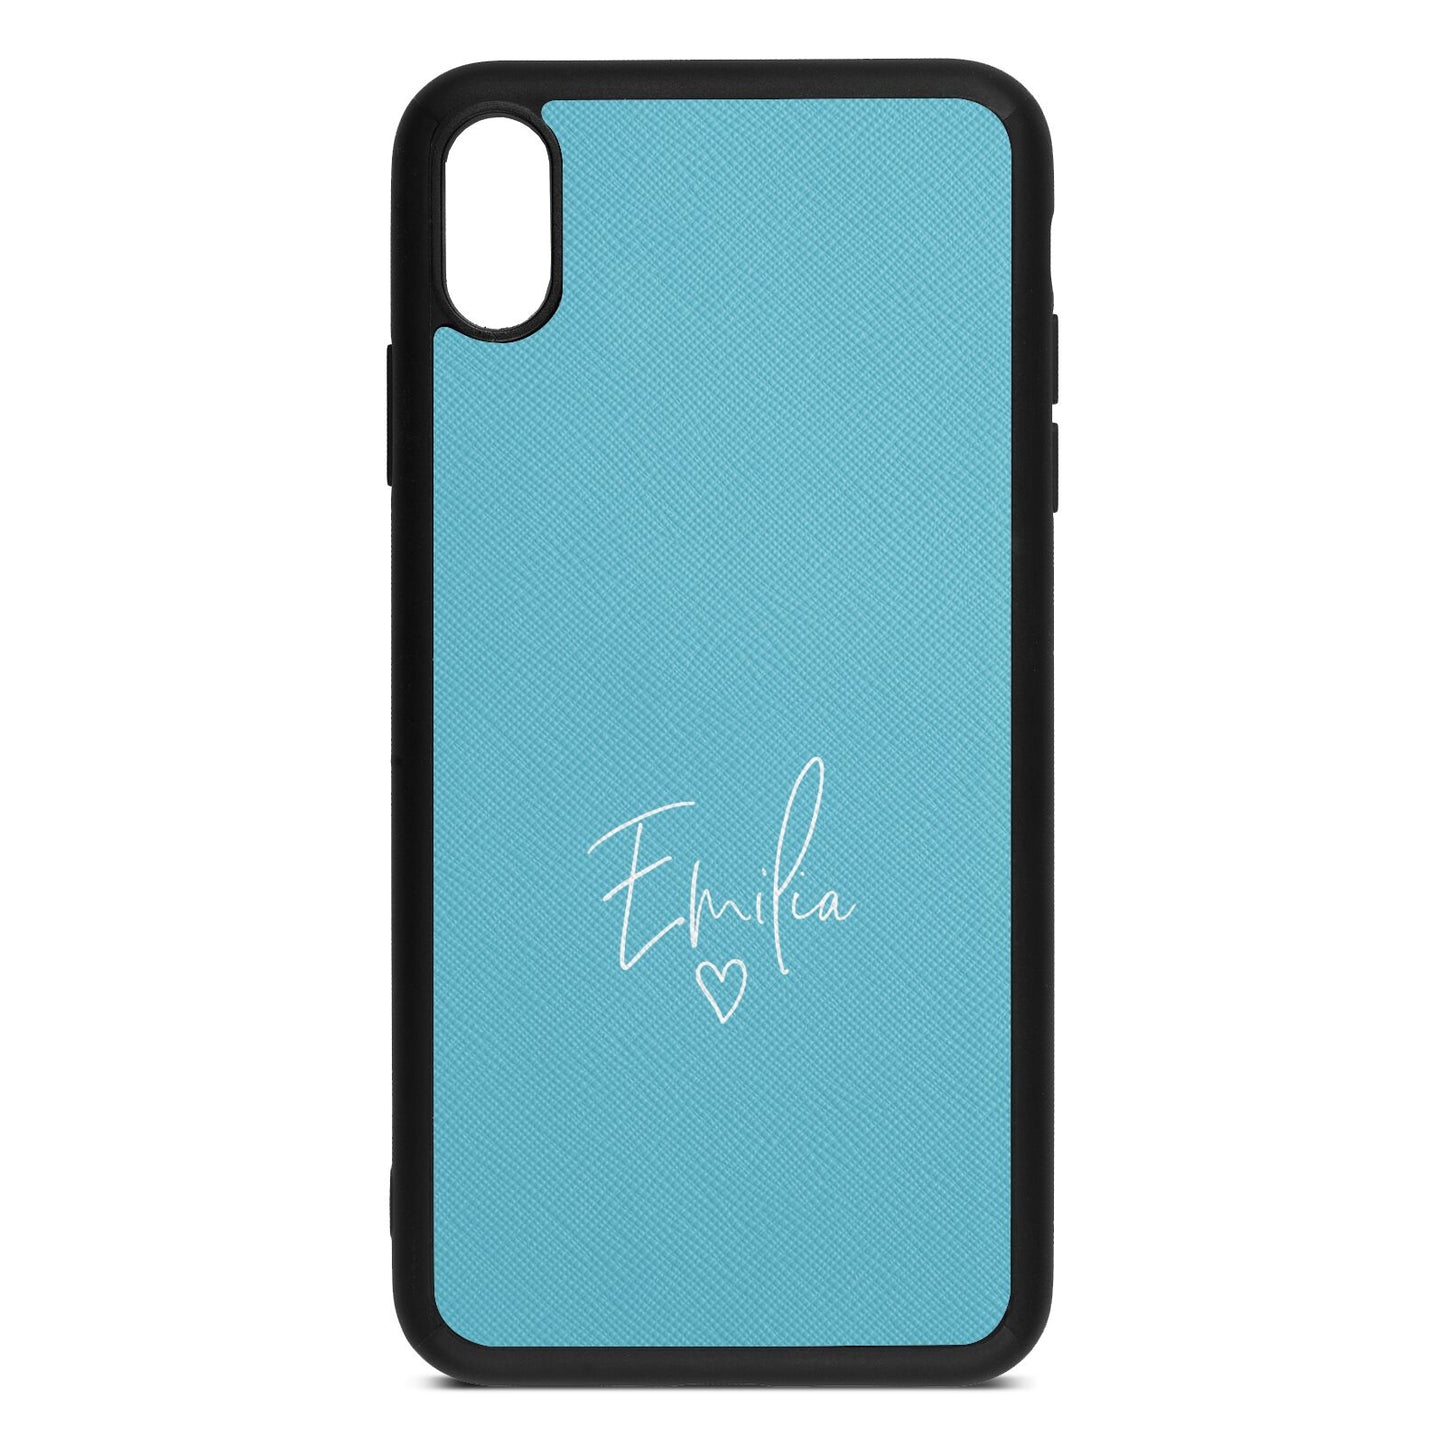 White Handwritten Name Transparent Sky Saffiano Leather iPhone Xs Max Case